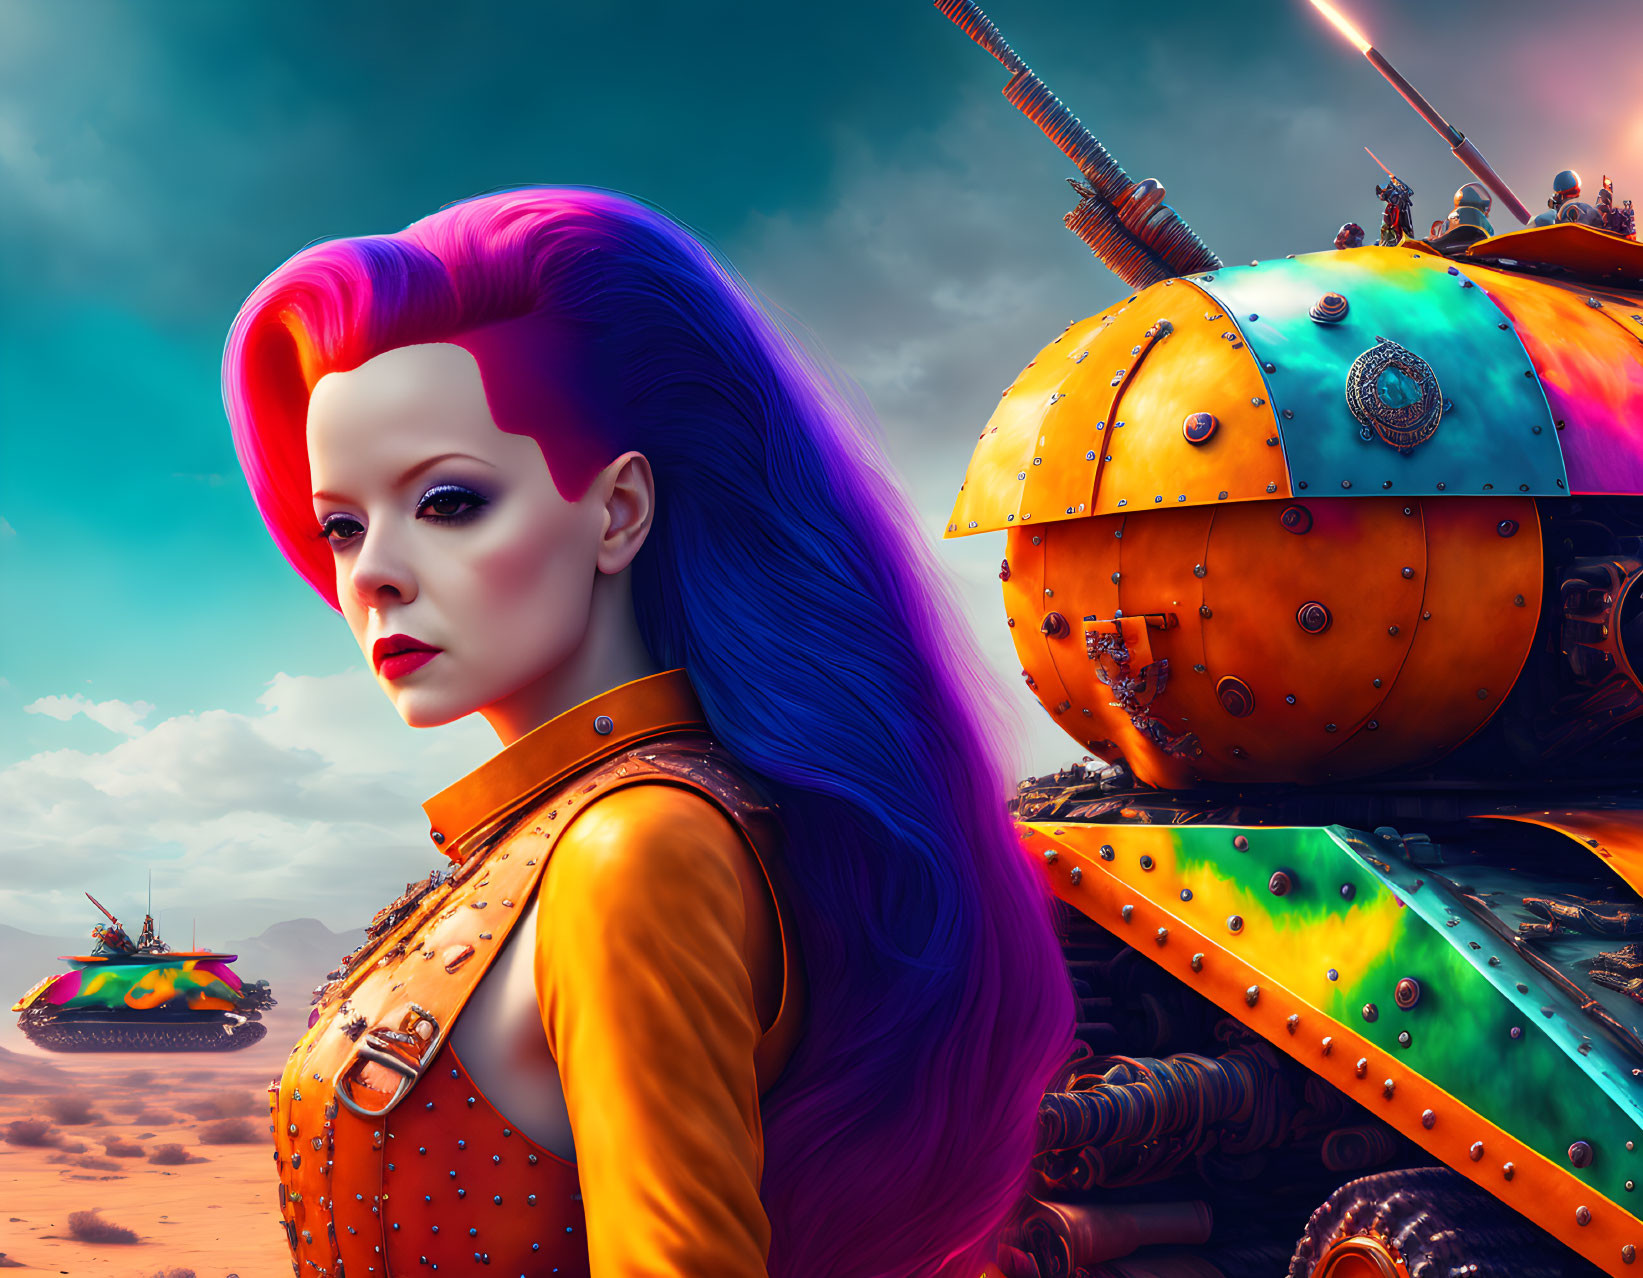 Vibrant purple and pink hair woman in surreal desert with futuristic tanks